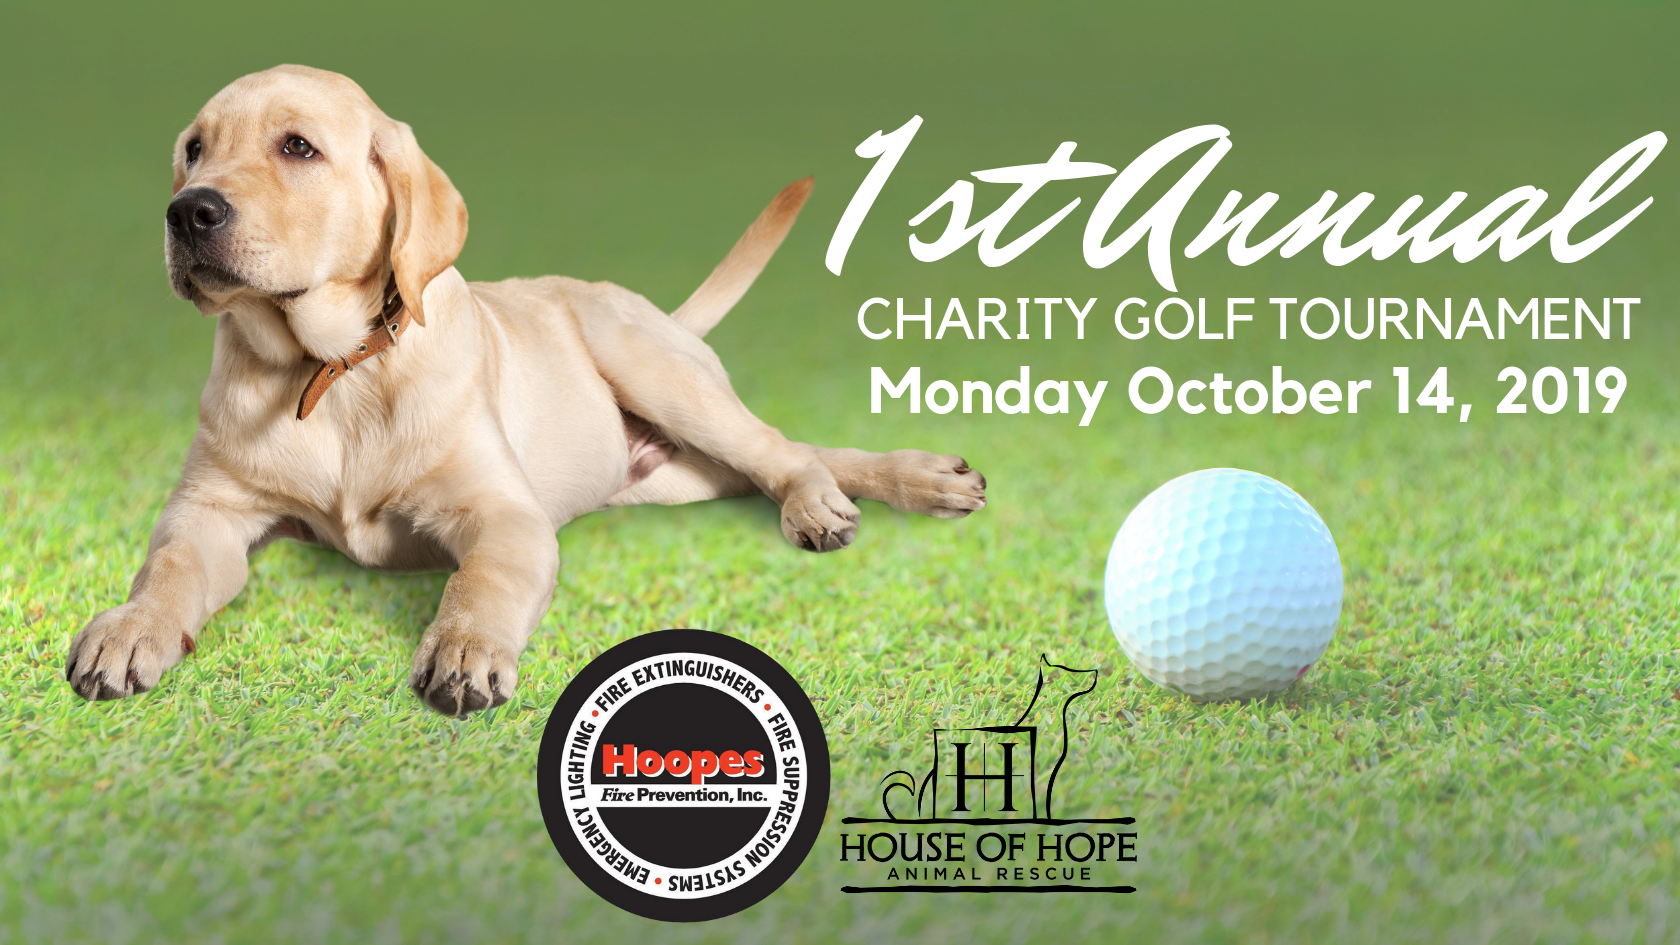 Hoopes + House of Hope Golf Outing